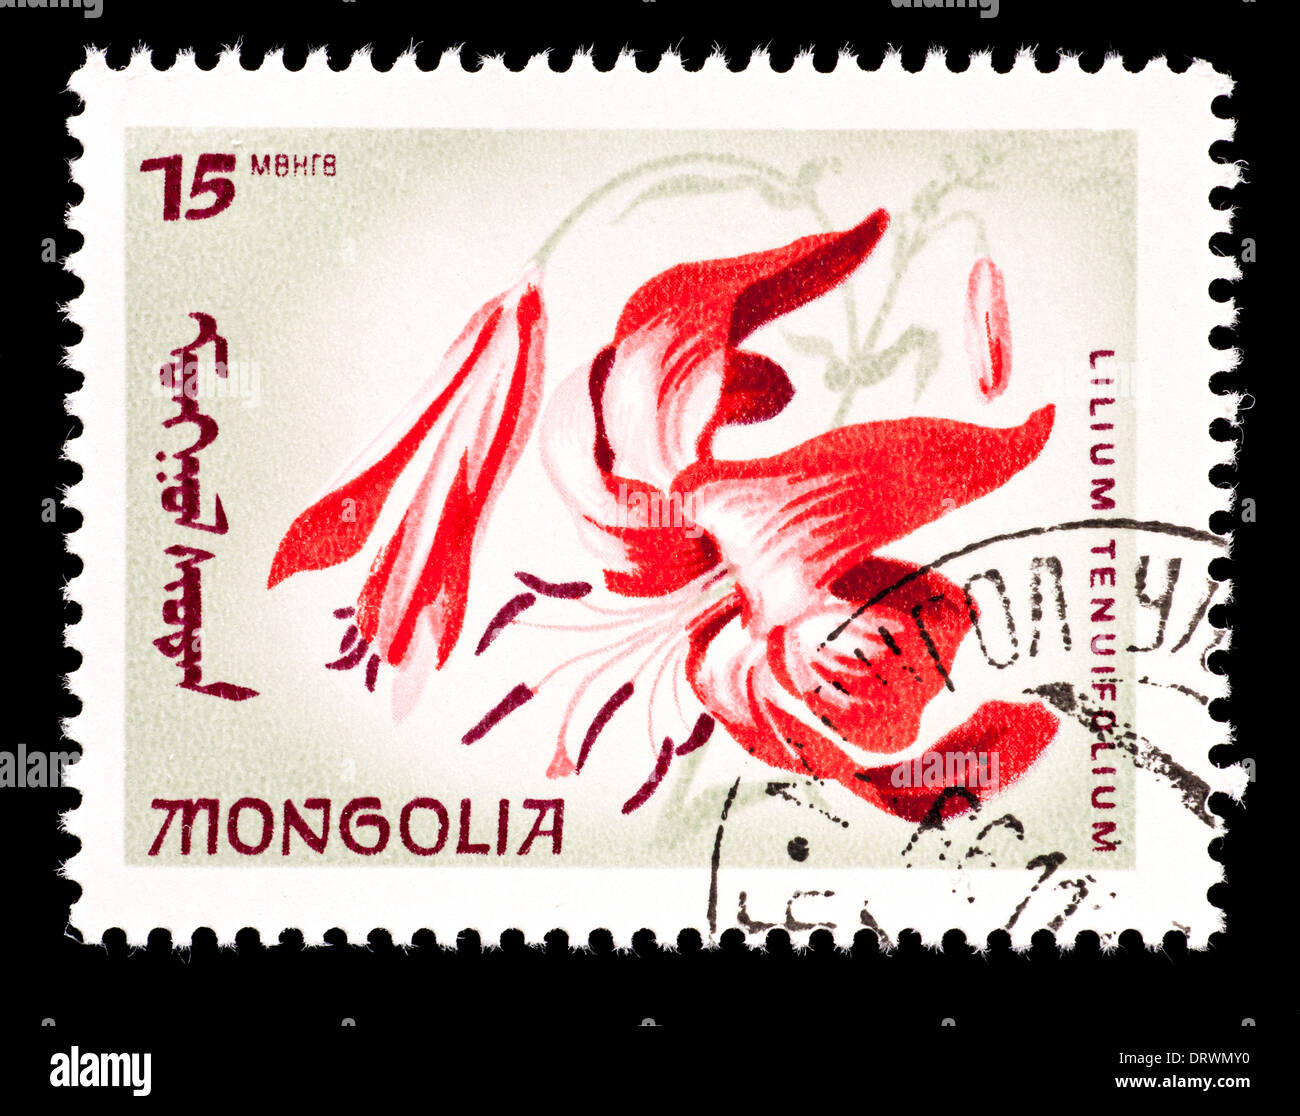 Postage stamp from Mongolia depicting the flower of a native Mongolian lily (Lillium tenuifolium). Stock Photo